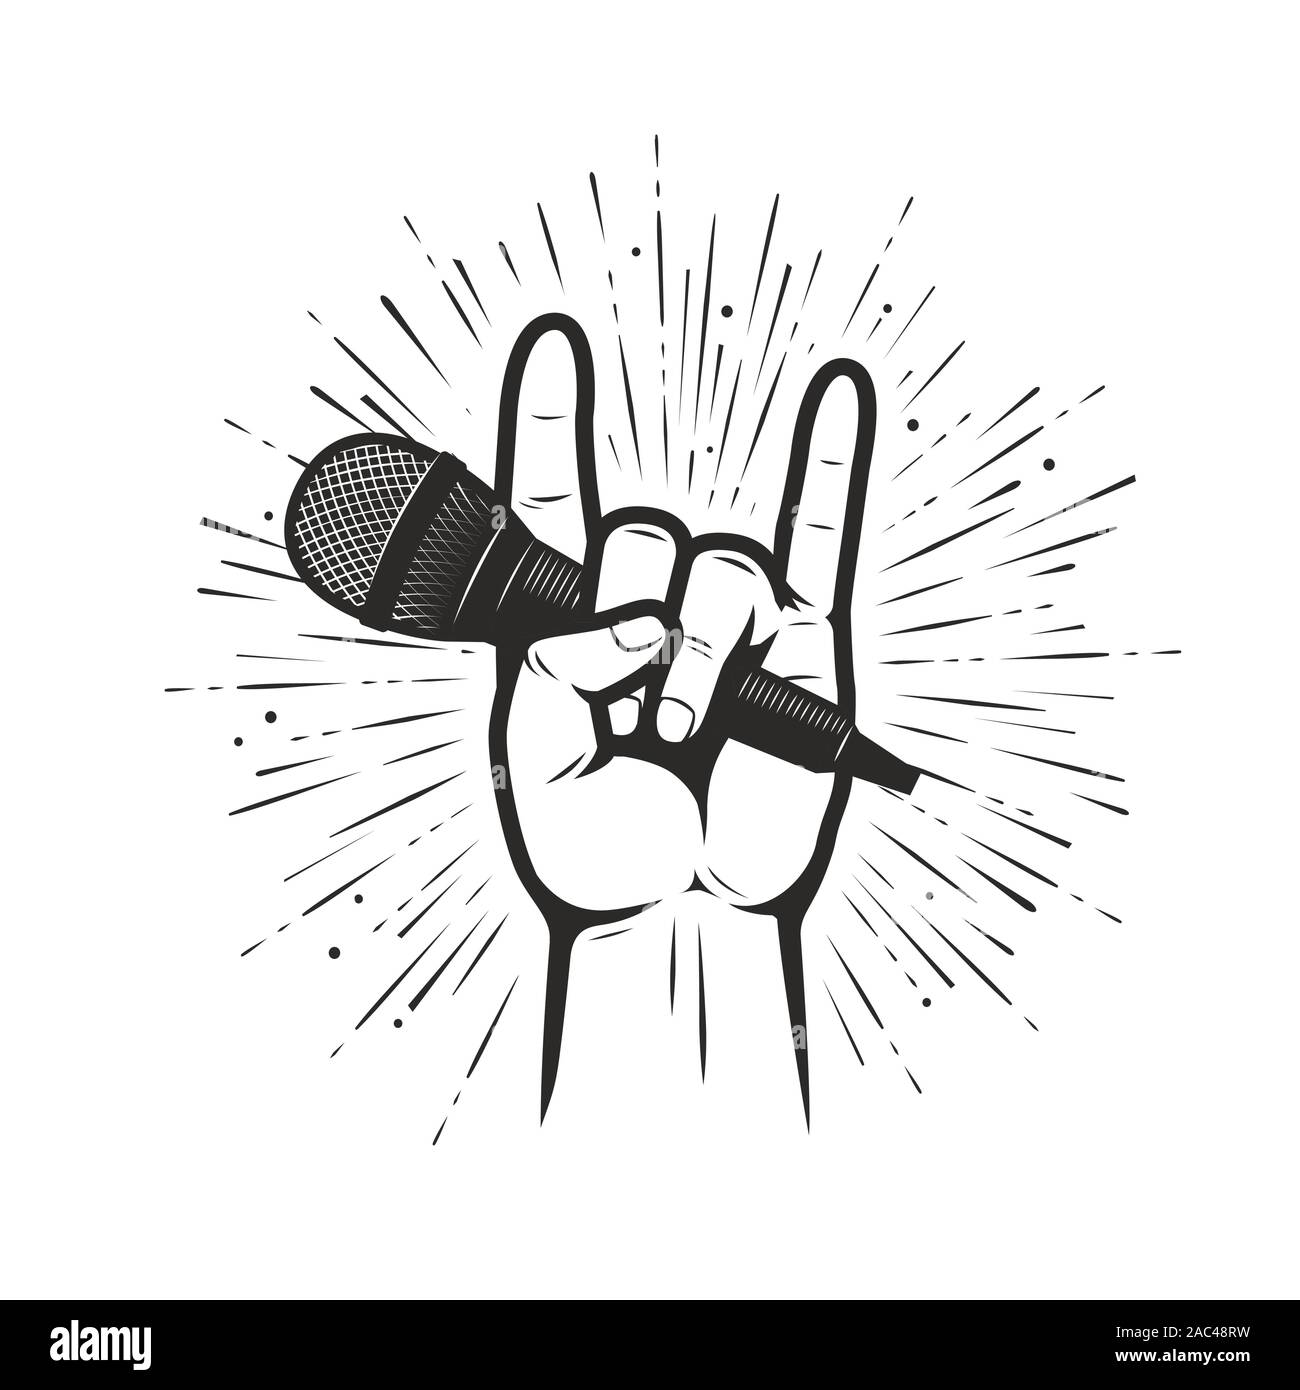 Microphone and speakers rap music emblem Vector Image